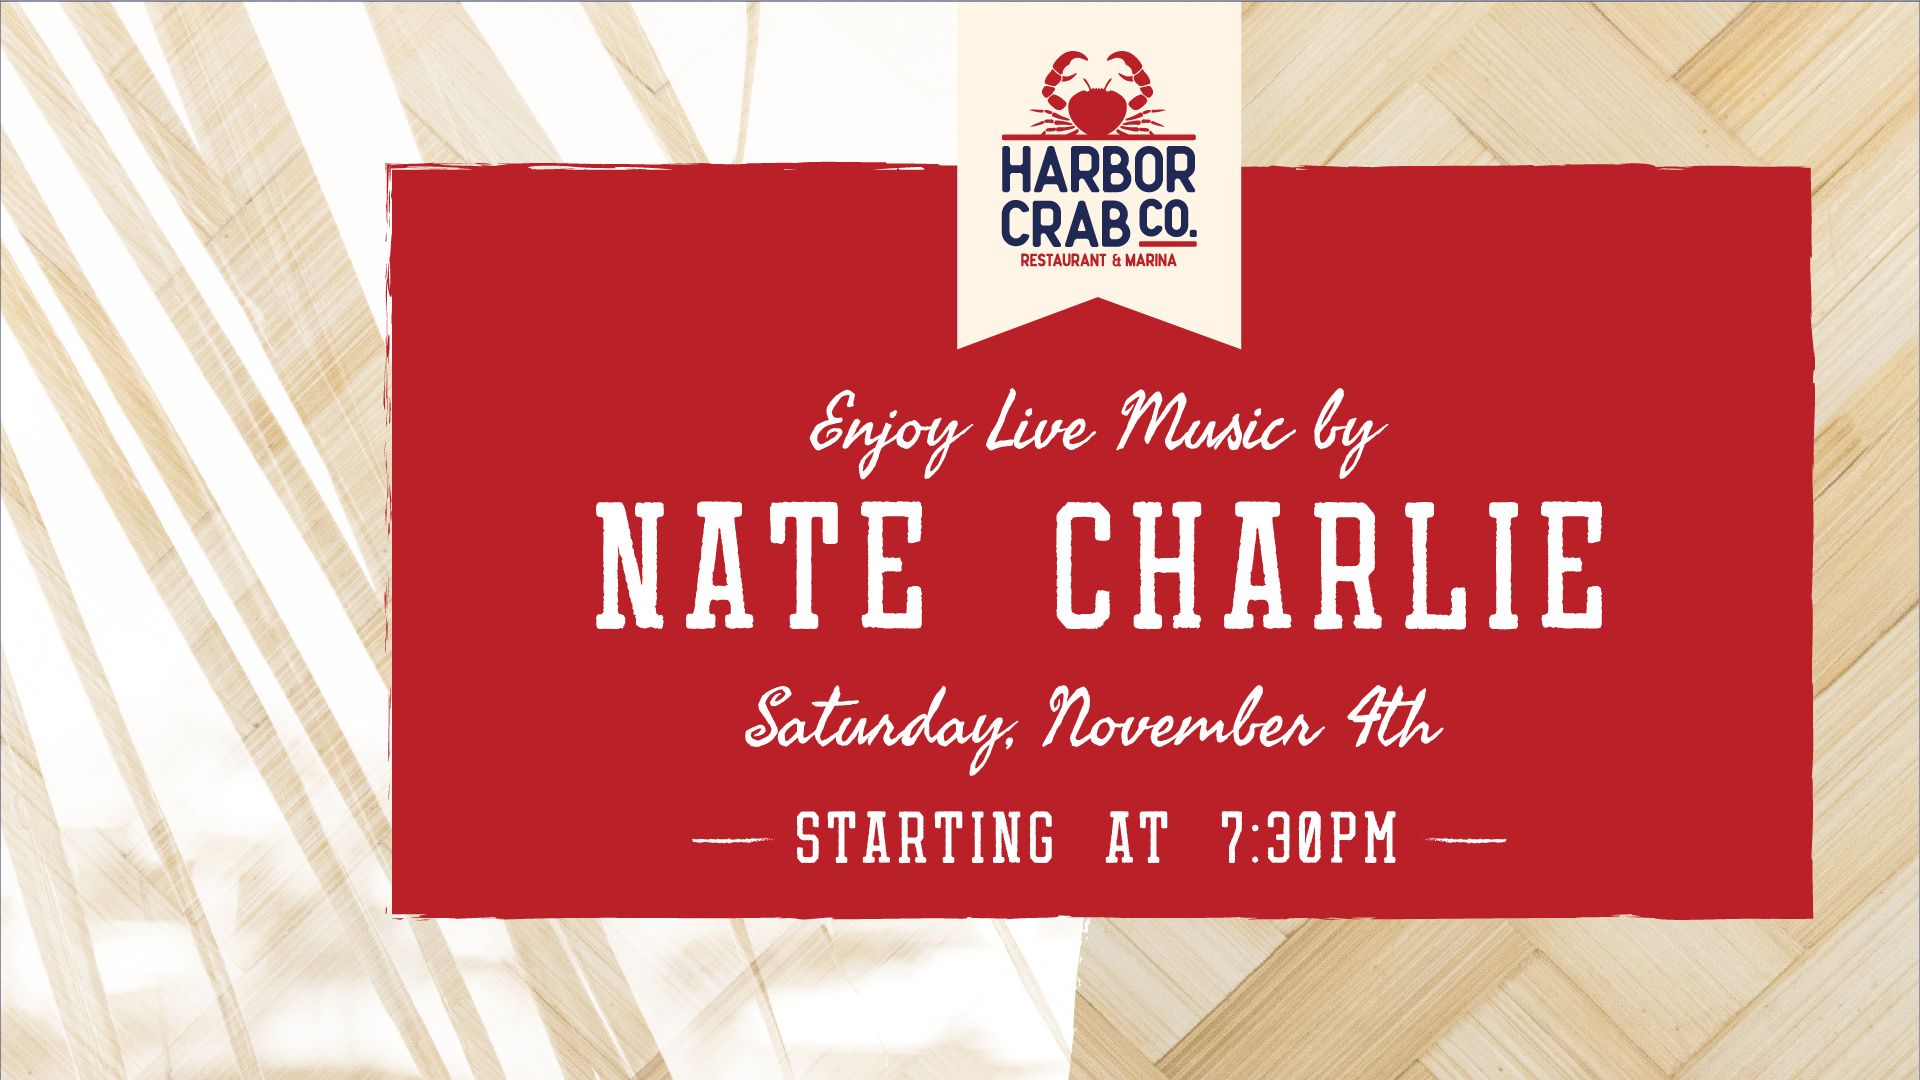 Live music with Nate Charlie on Saturday, November 4th at 7:30pm.